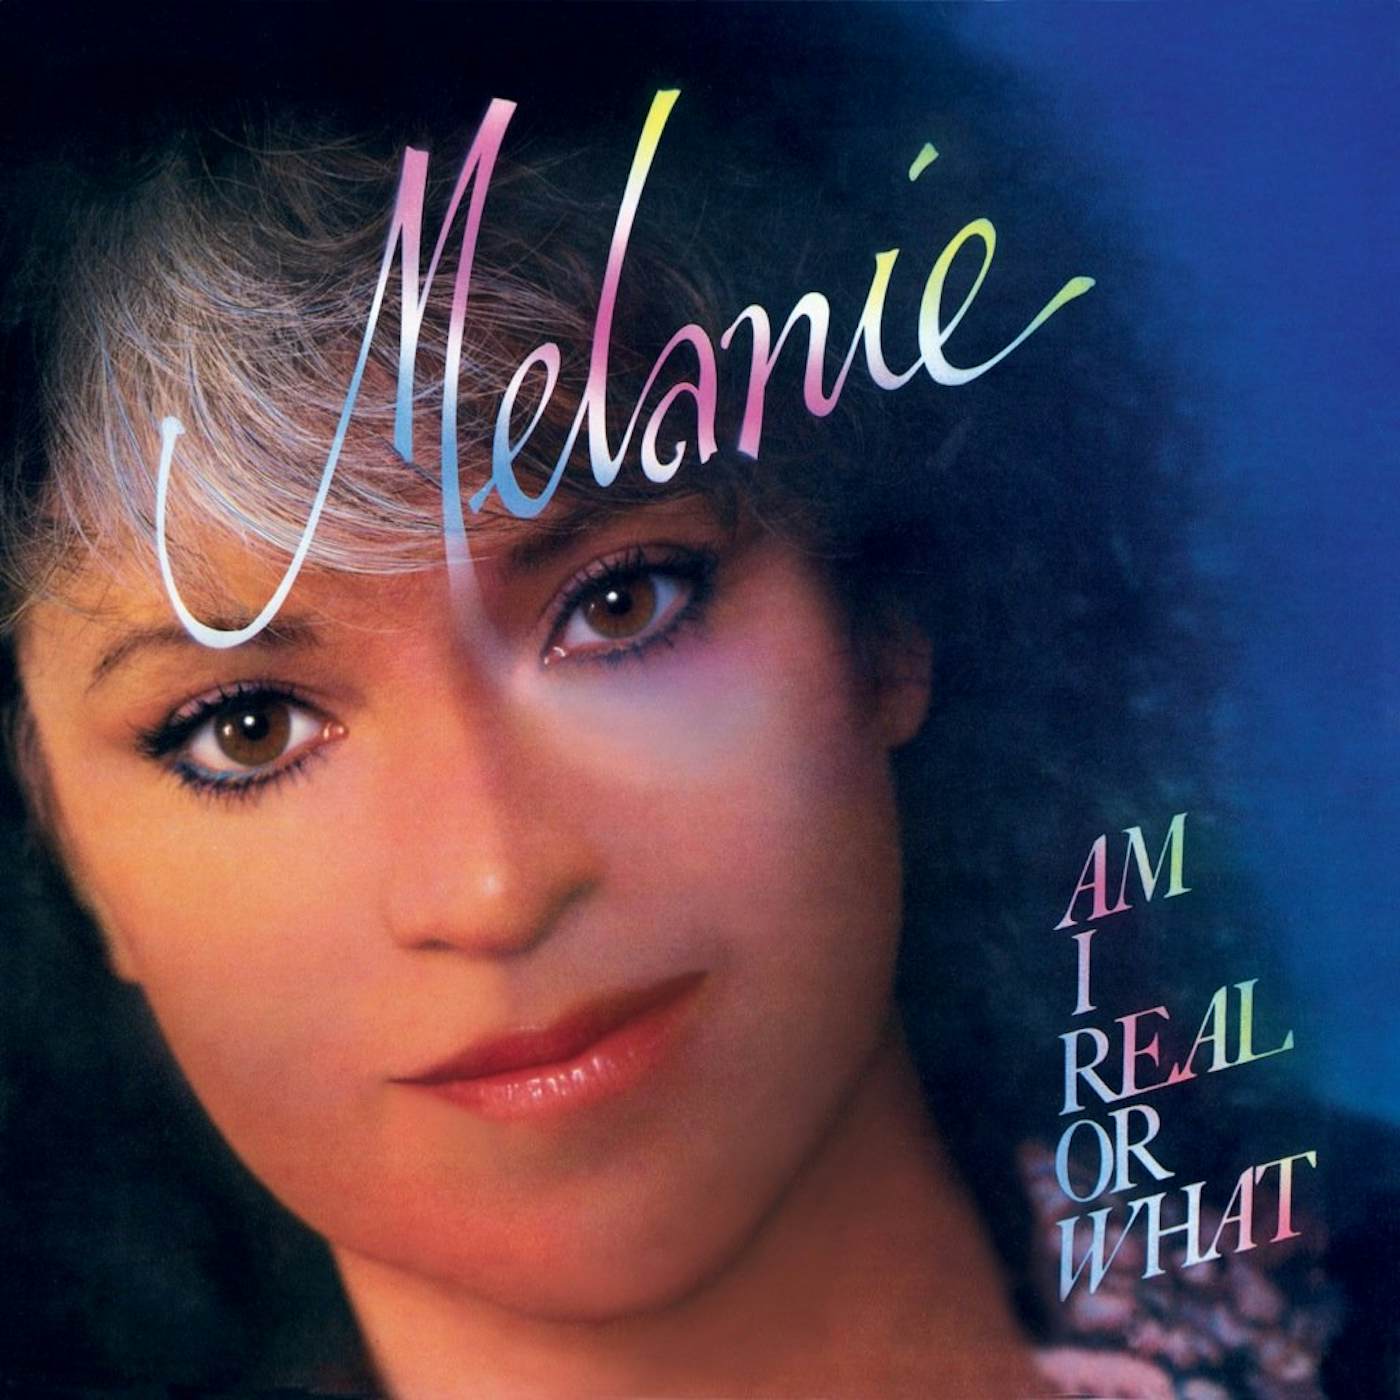 Melanie - Am I Real or What